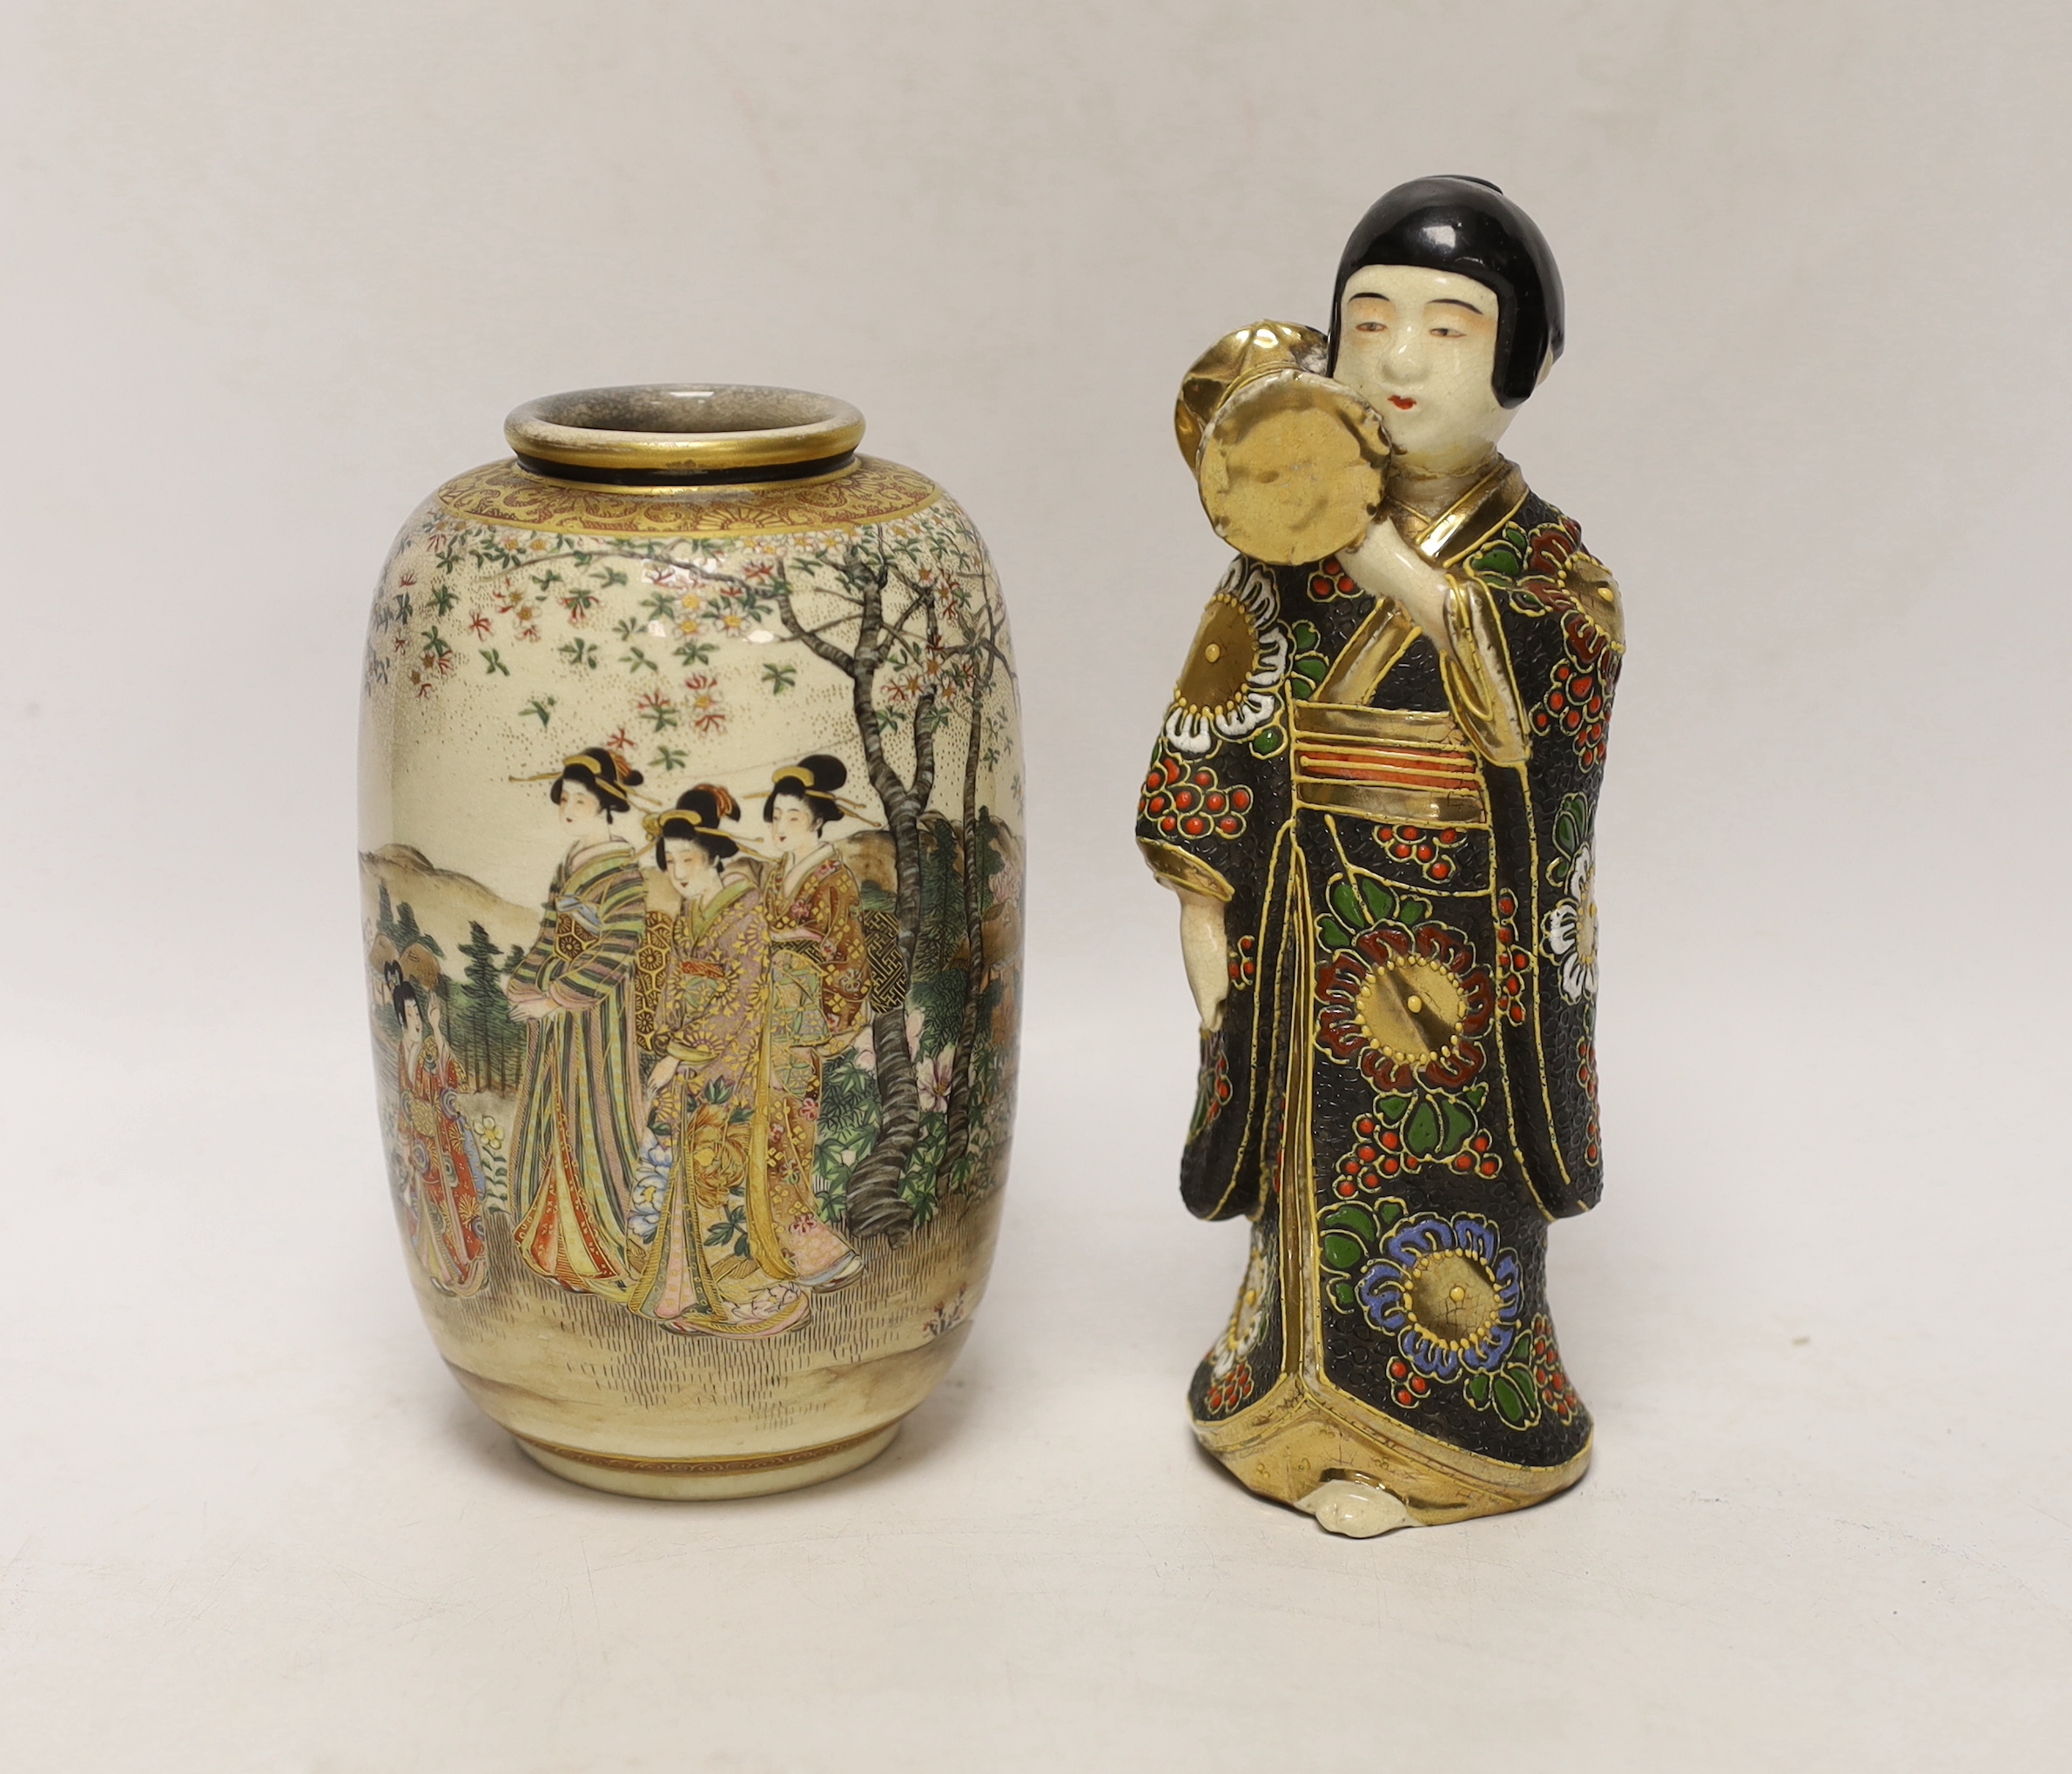 A Japanese Satsuma vase decorated with females wearing kimonos before a landscape and a figure